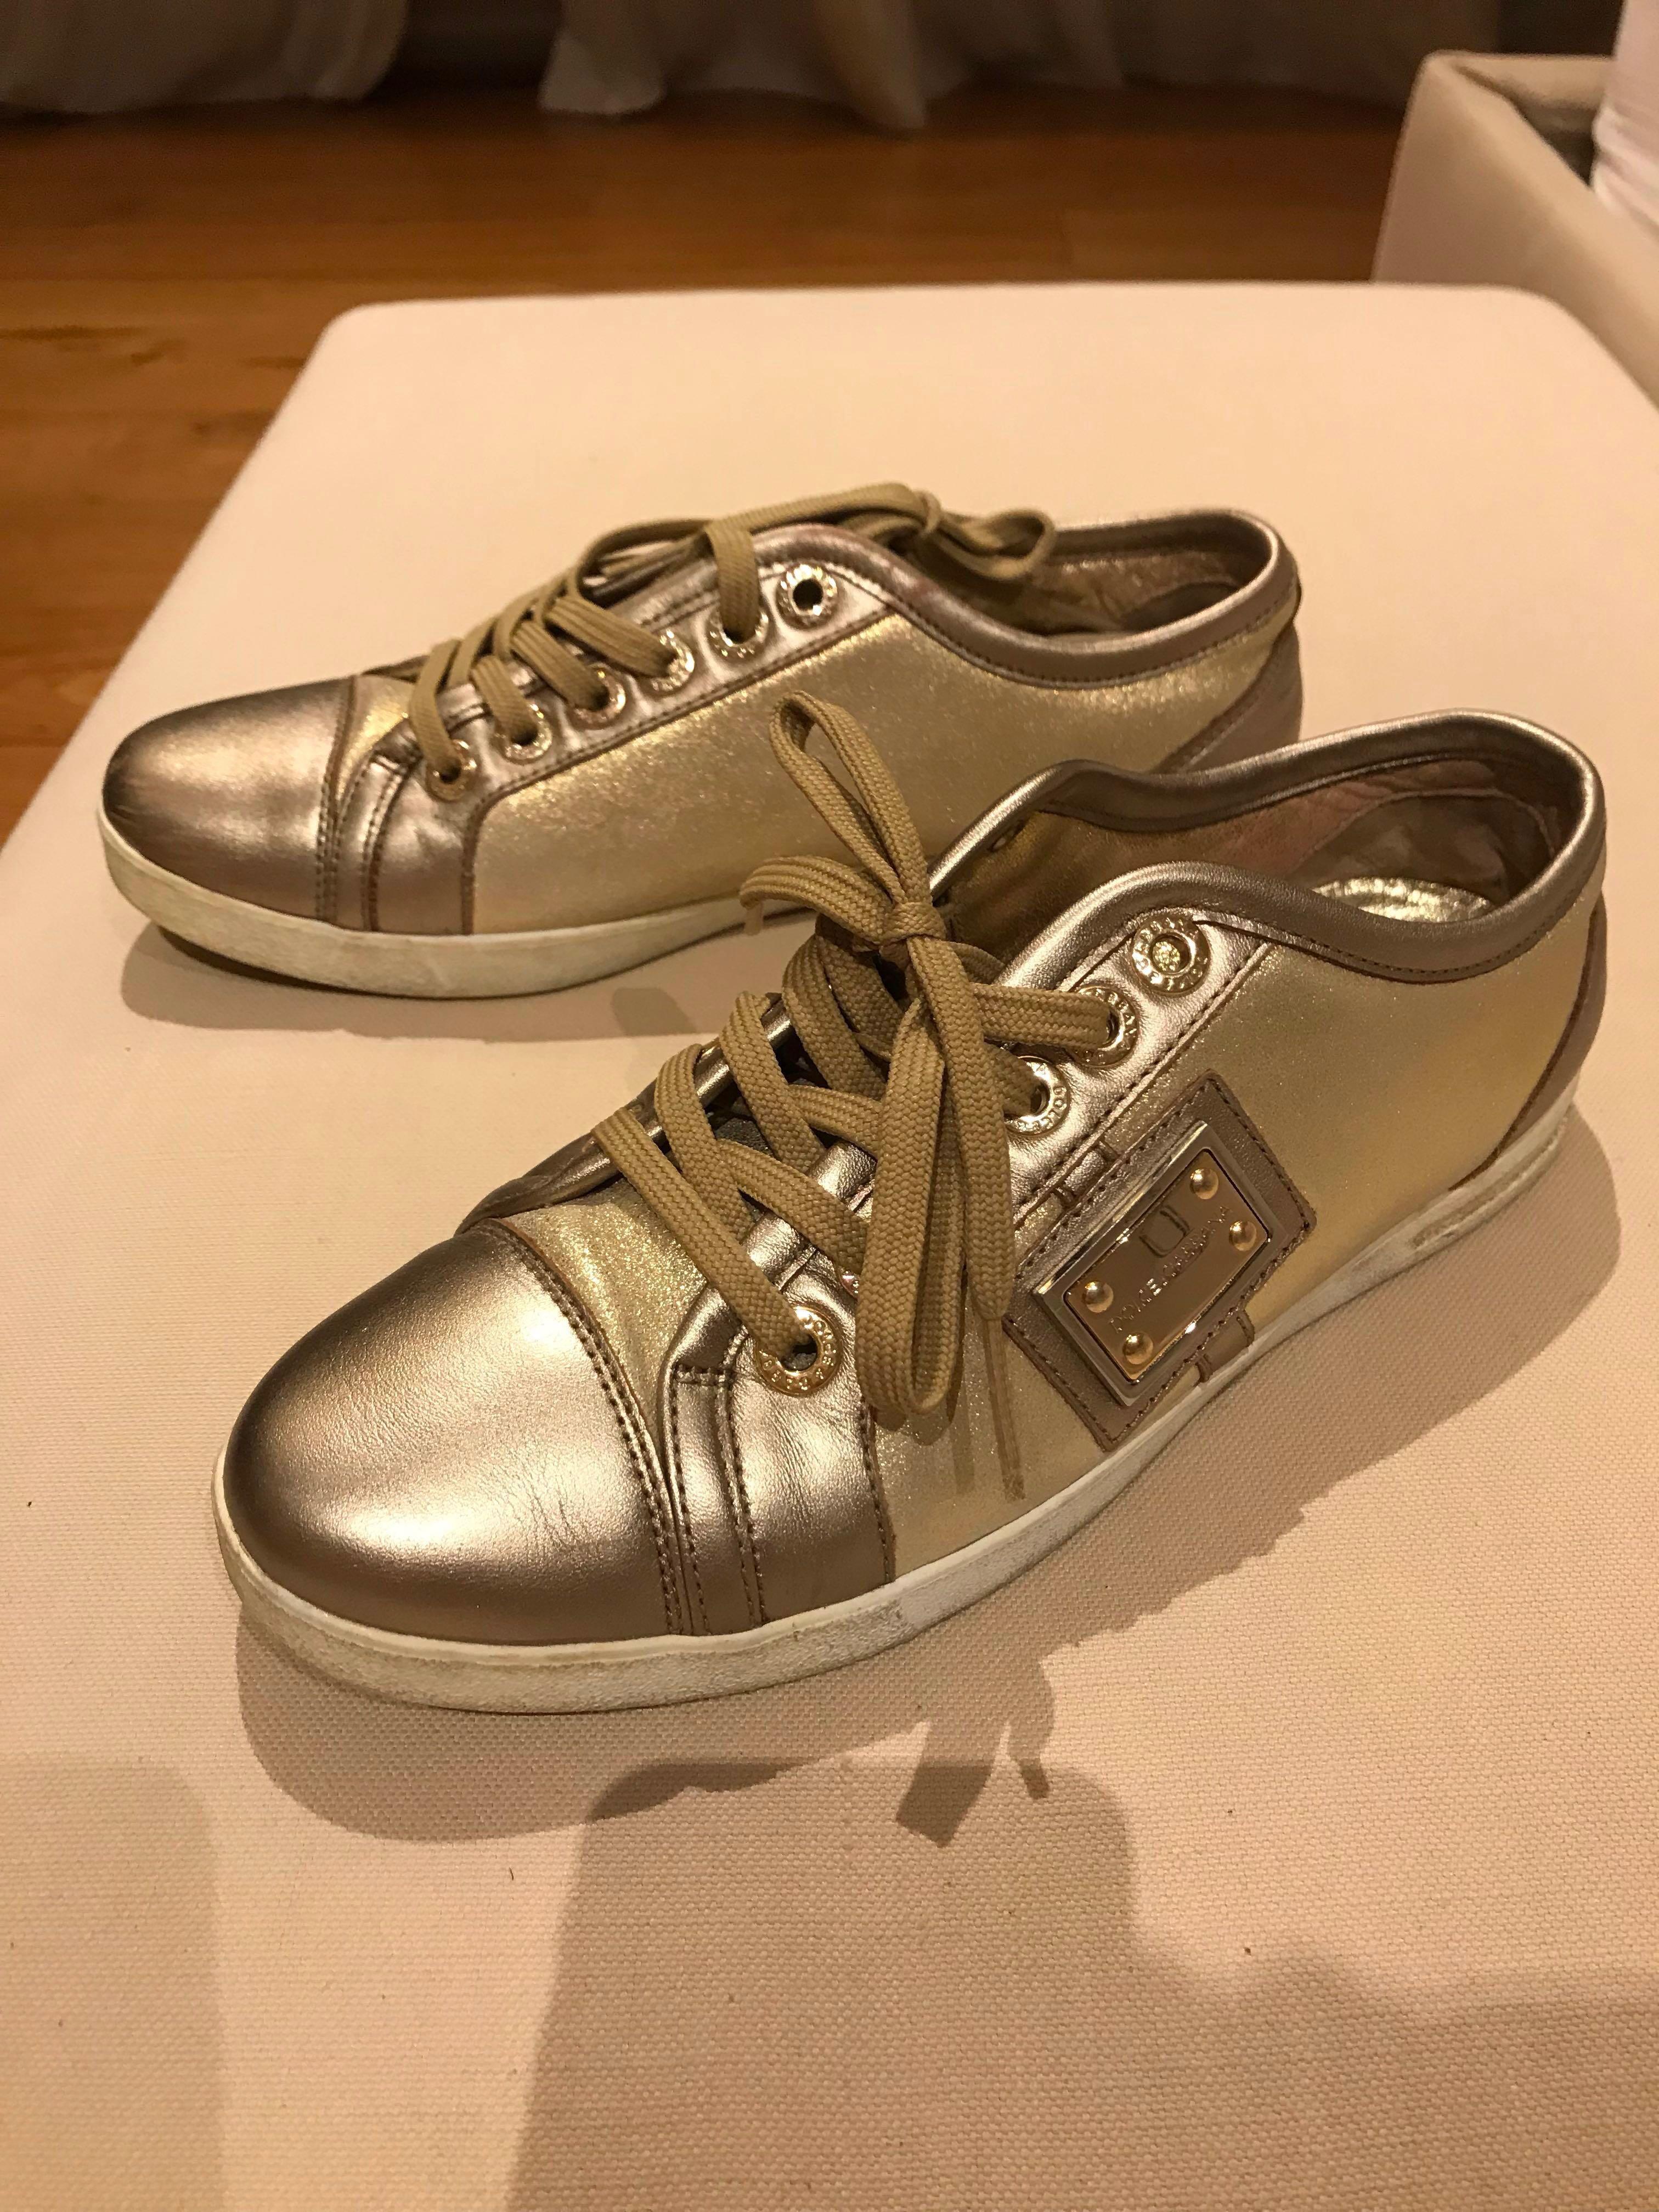 dolce and gabbana shoes gold